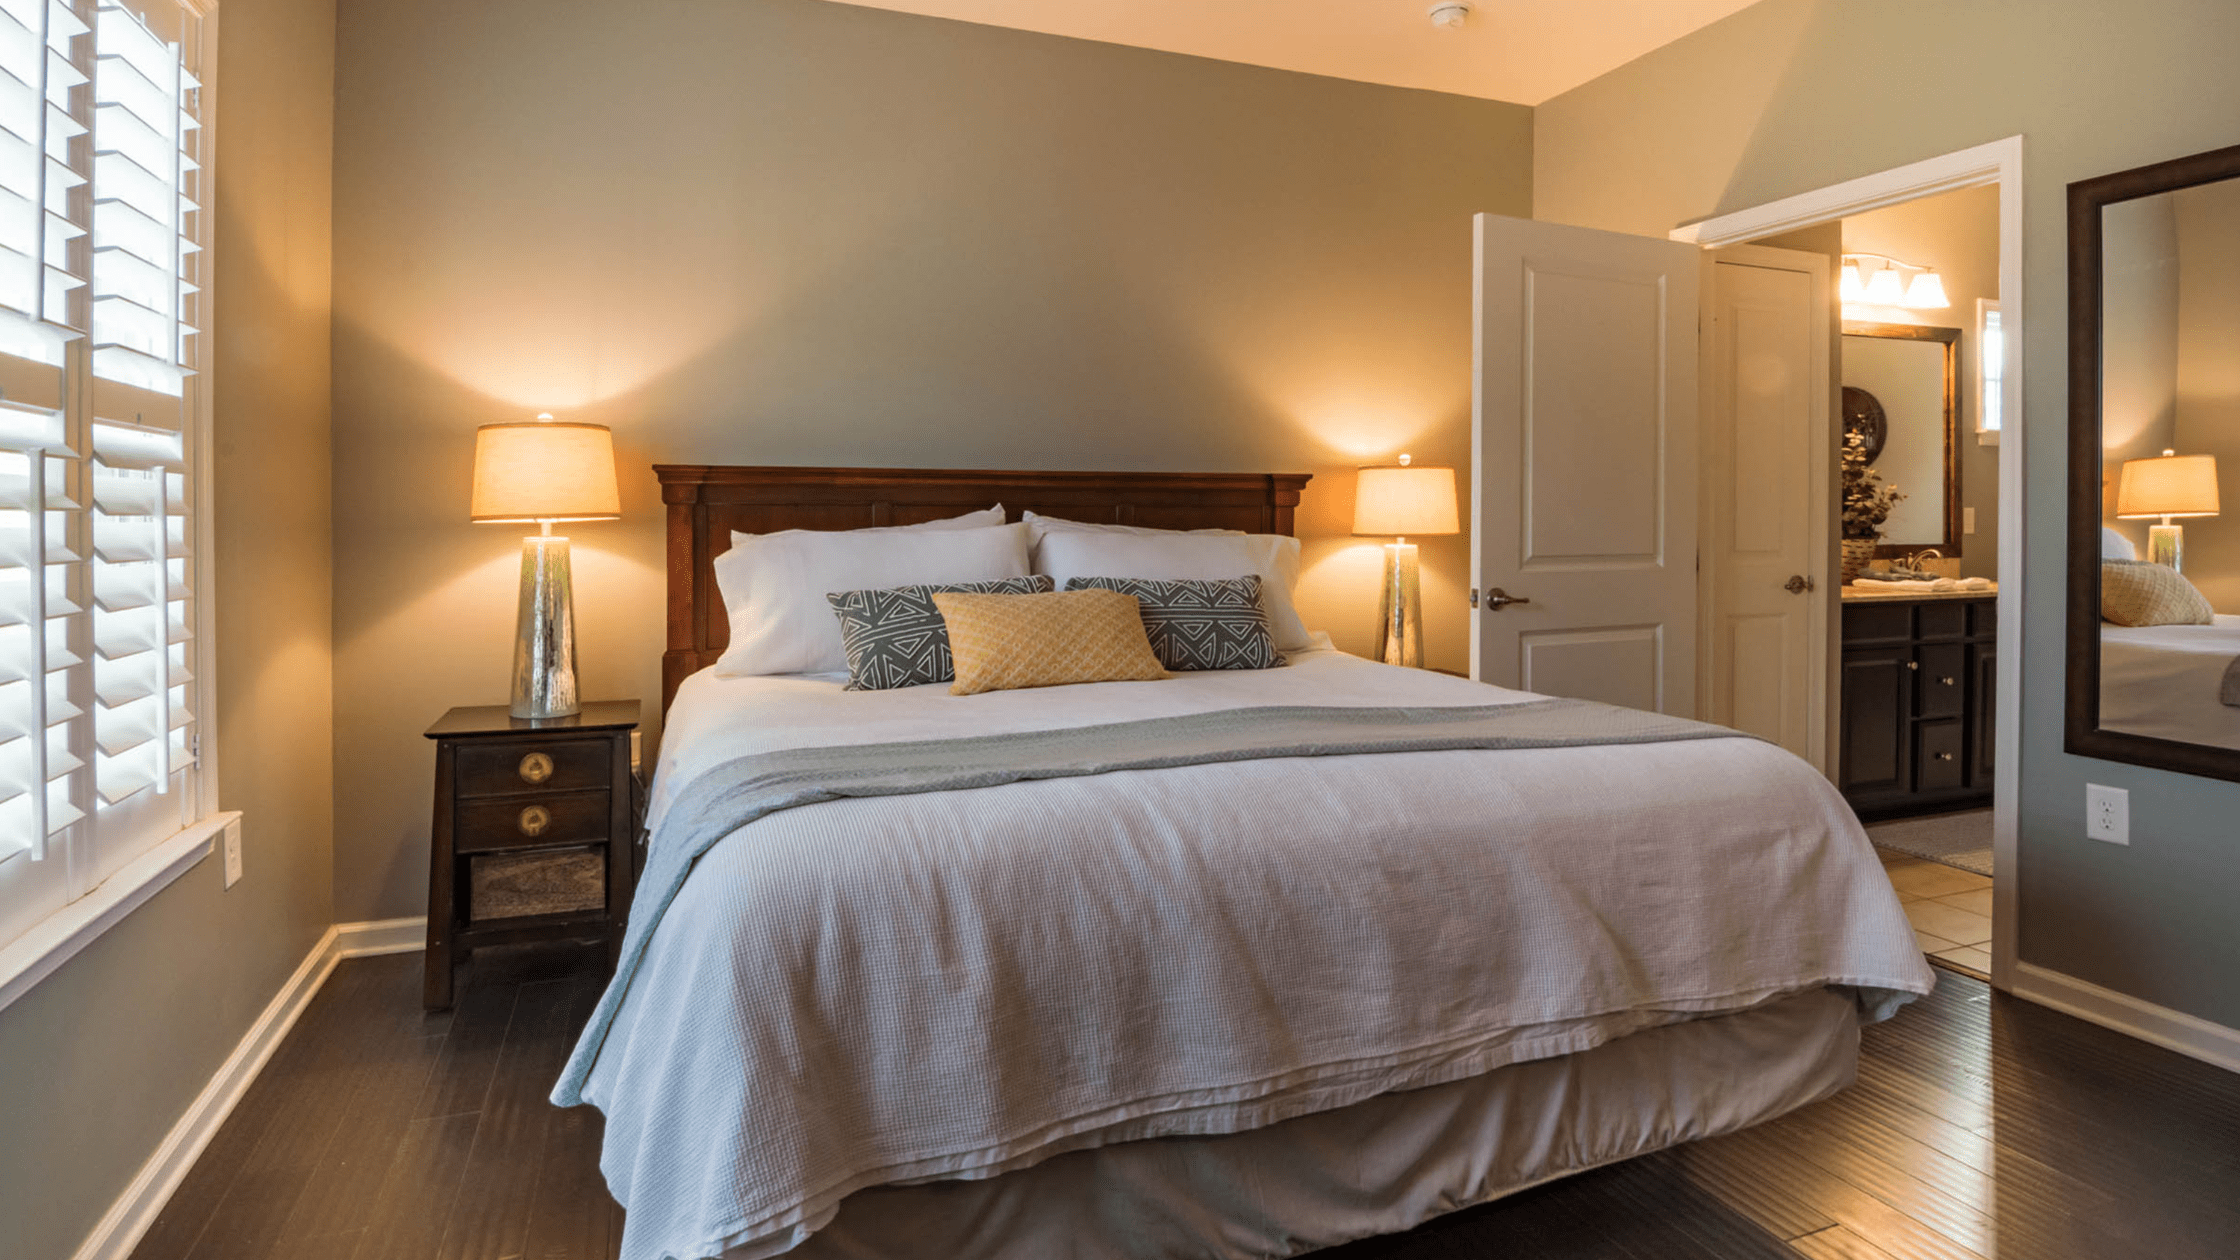 Which Doors Are Best For Bedrooms? A Complete Guide